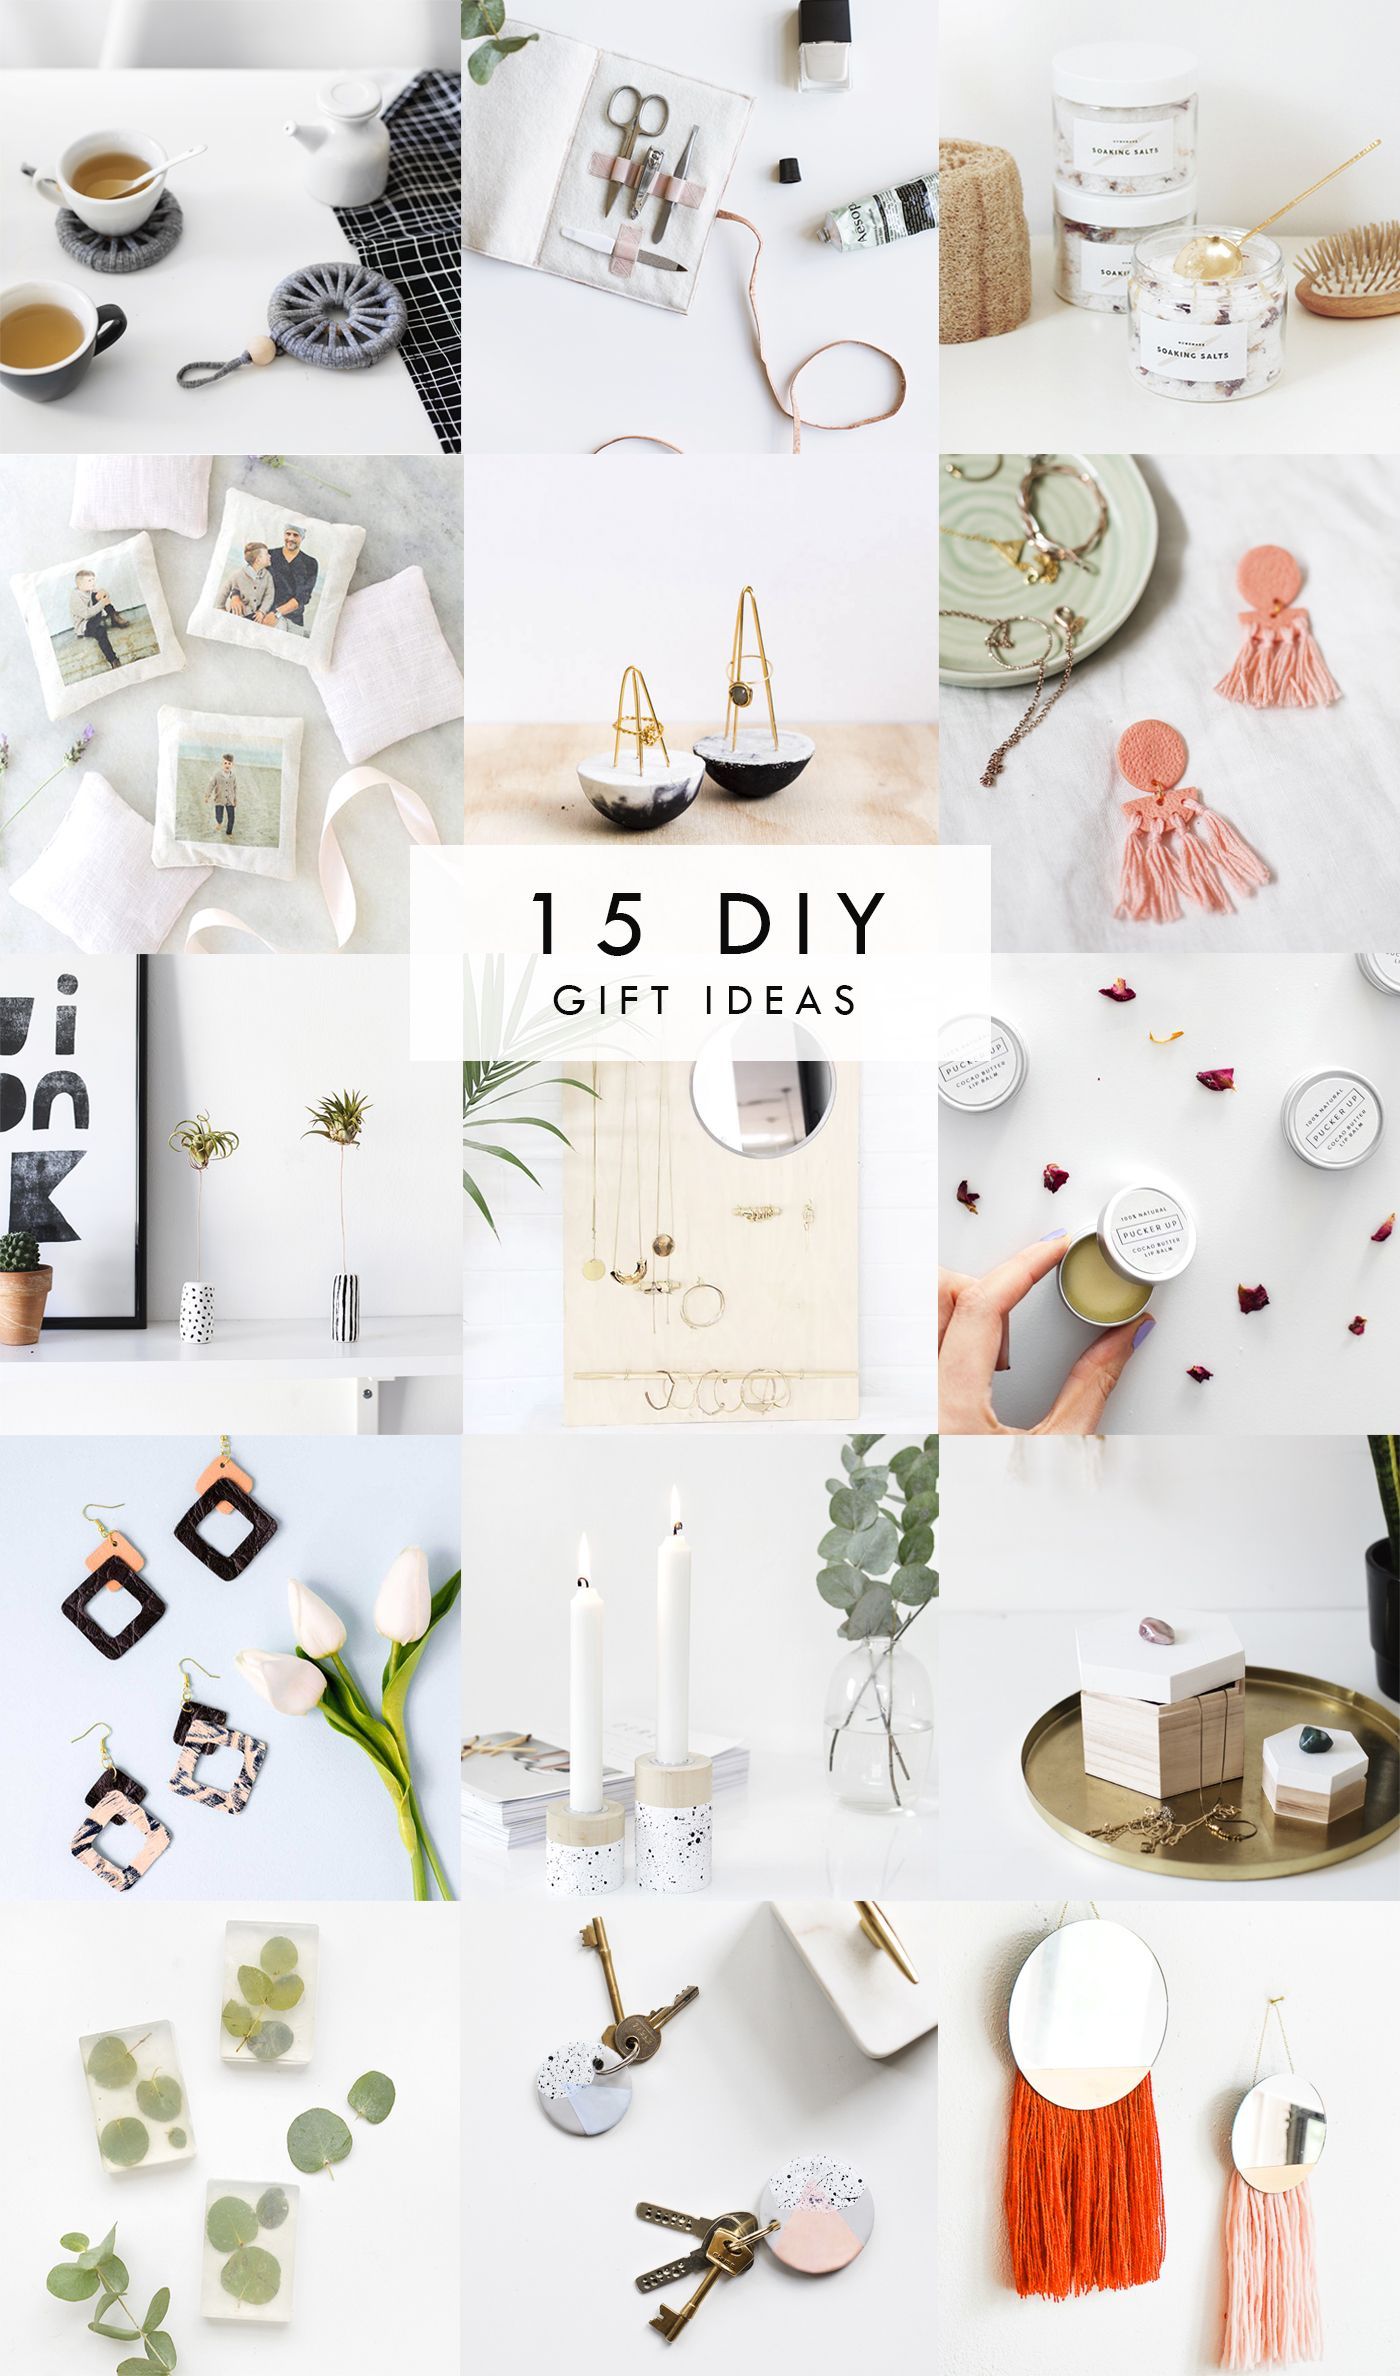 DIY Christmas gifts | The Lovely Drawer - DIY Christmas gifts | The Lovely Drawer -   16 diy Gifts creative ideas